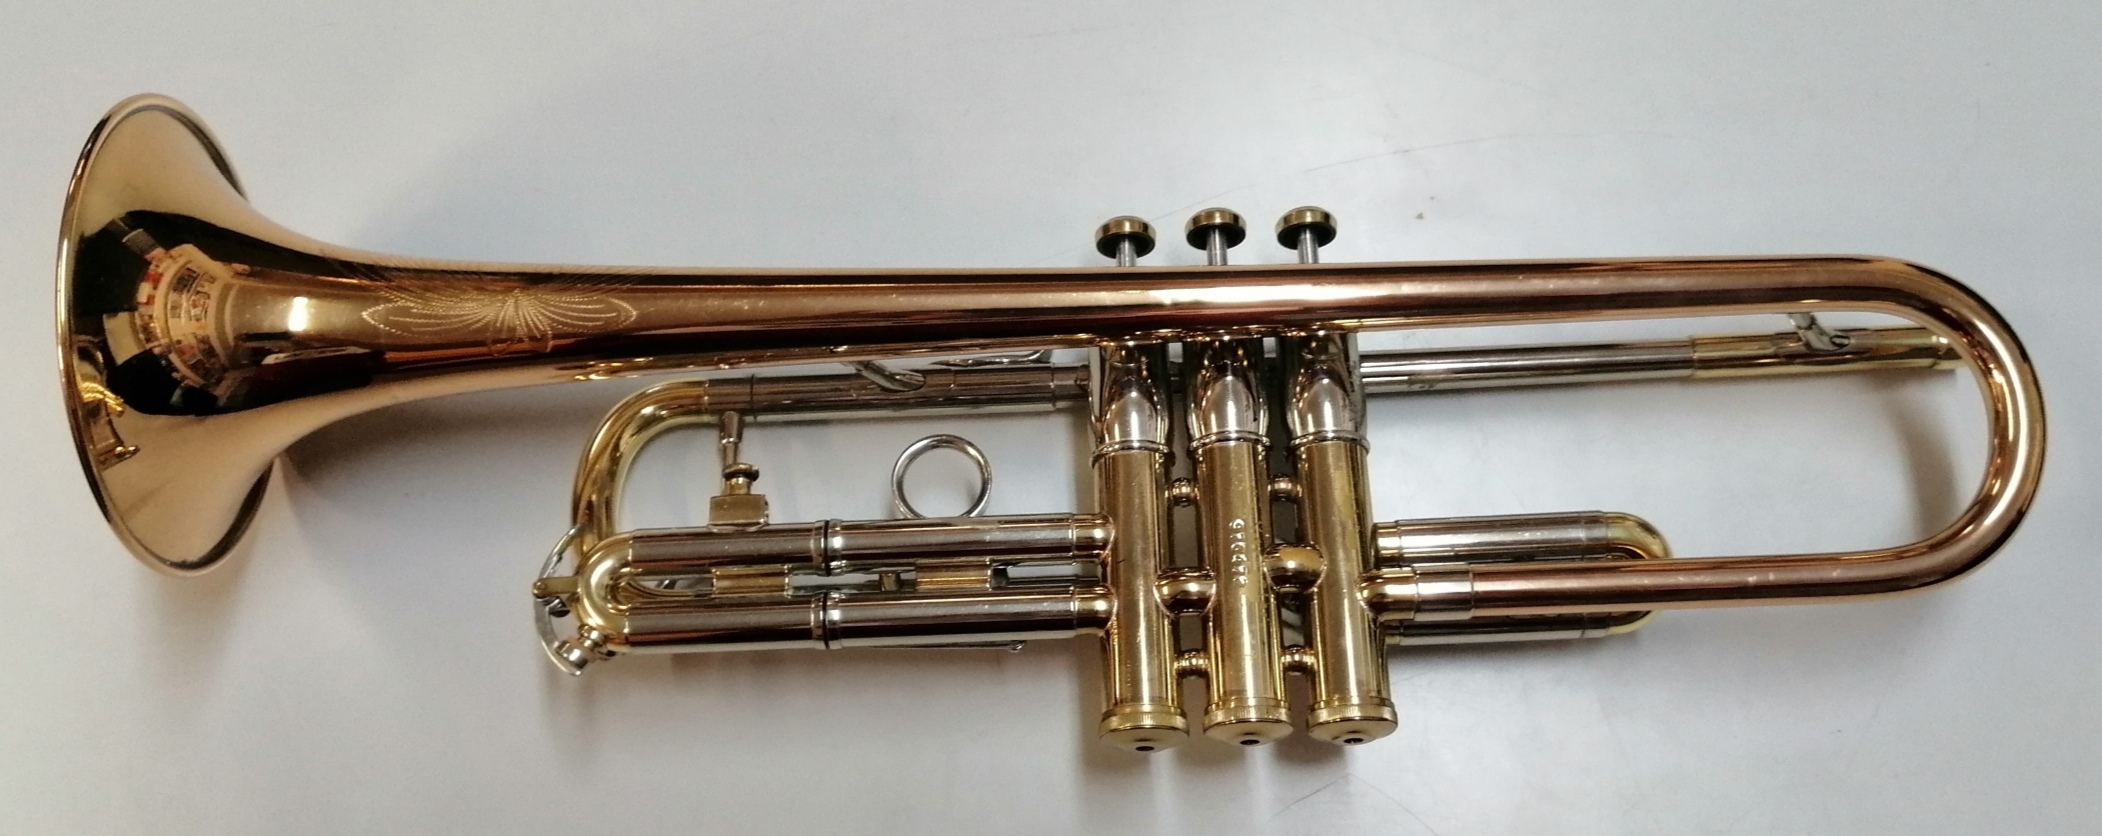 olds recording trumpet serial numbers